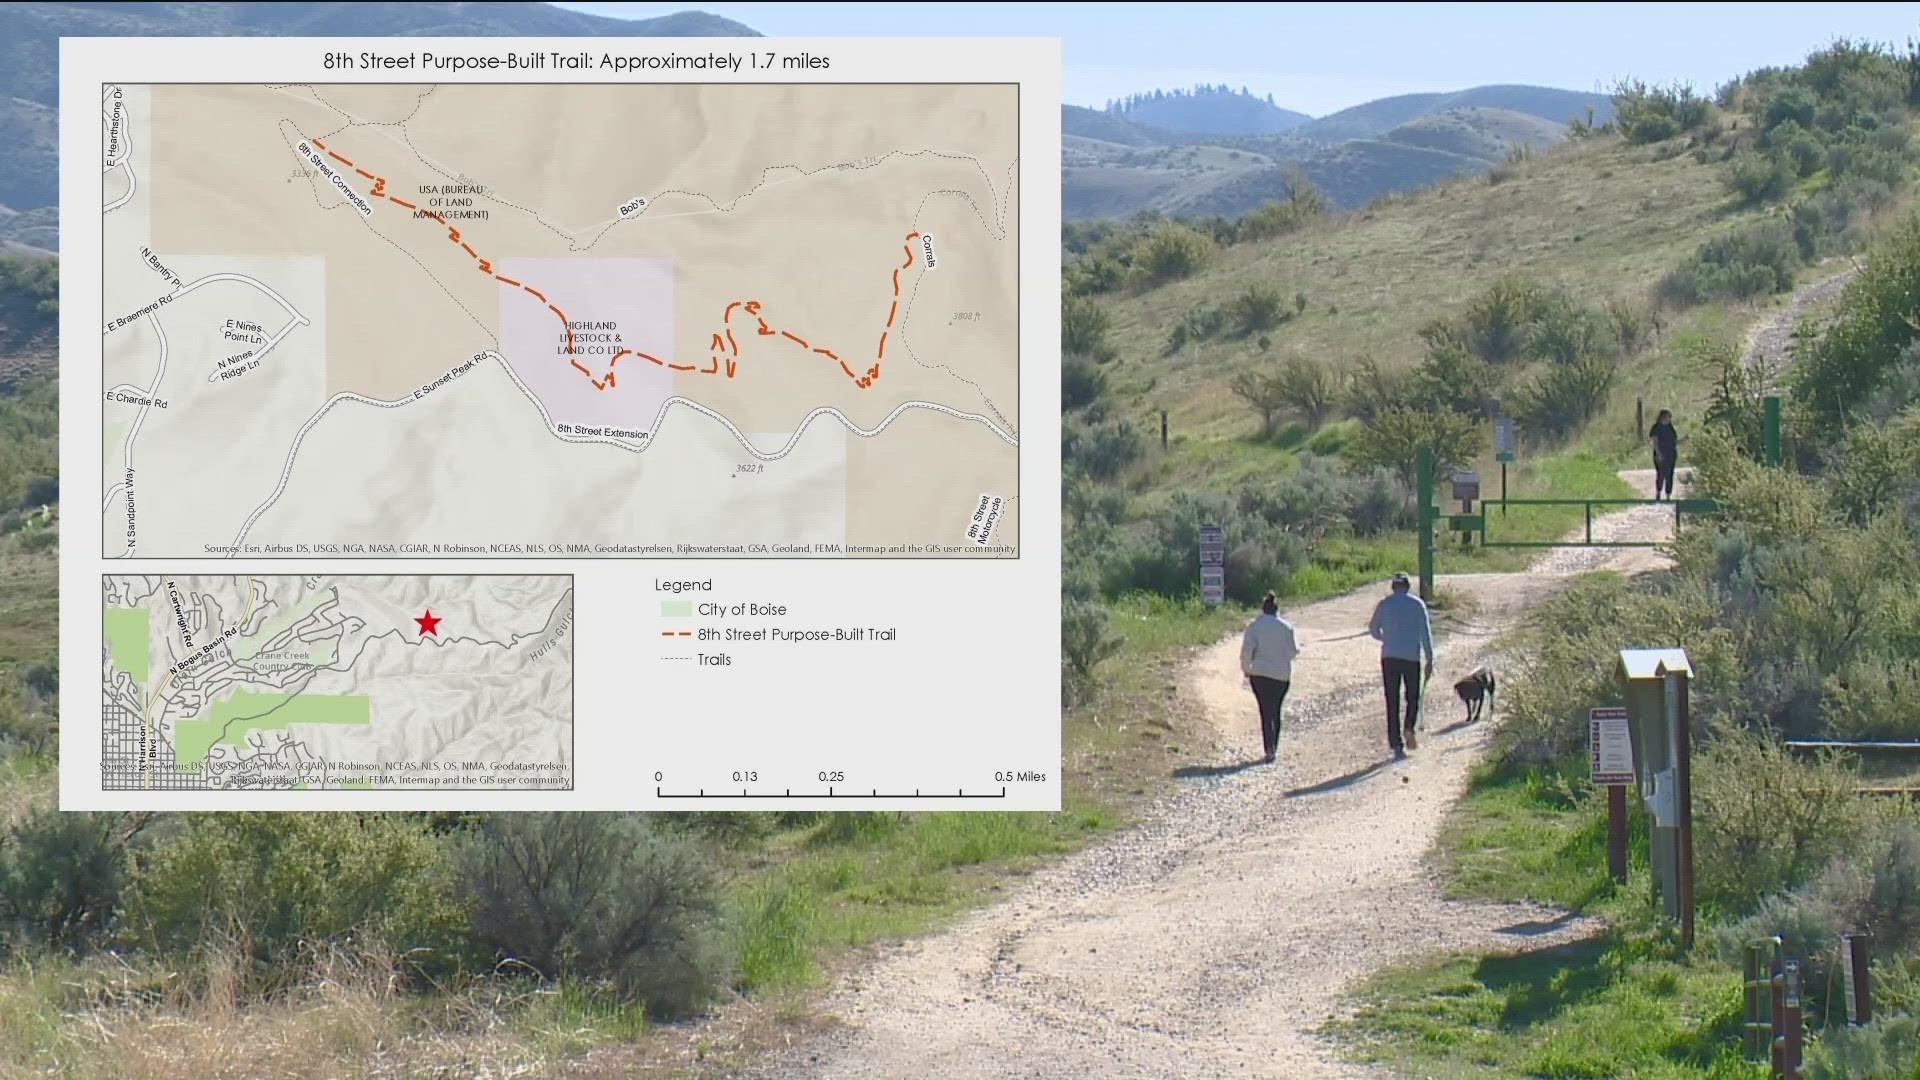 The two trails, Curlew Connection and 8th Street Purpose-Built will be a part of the Ridge to Rivers Trail System.